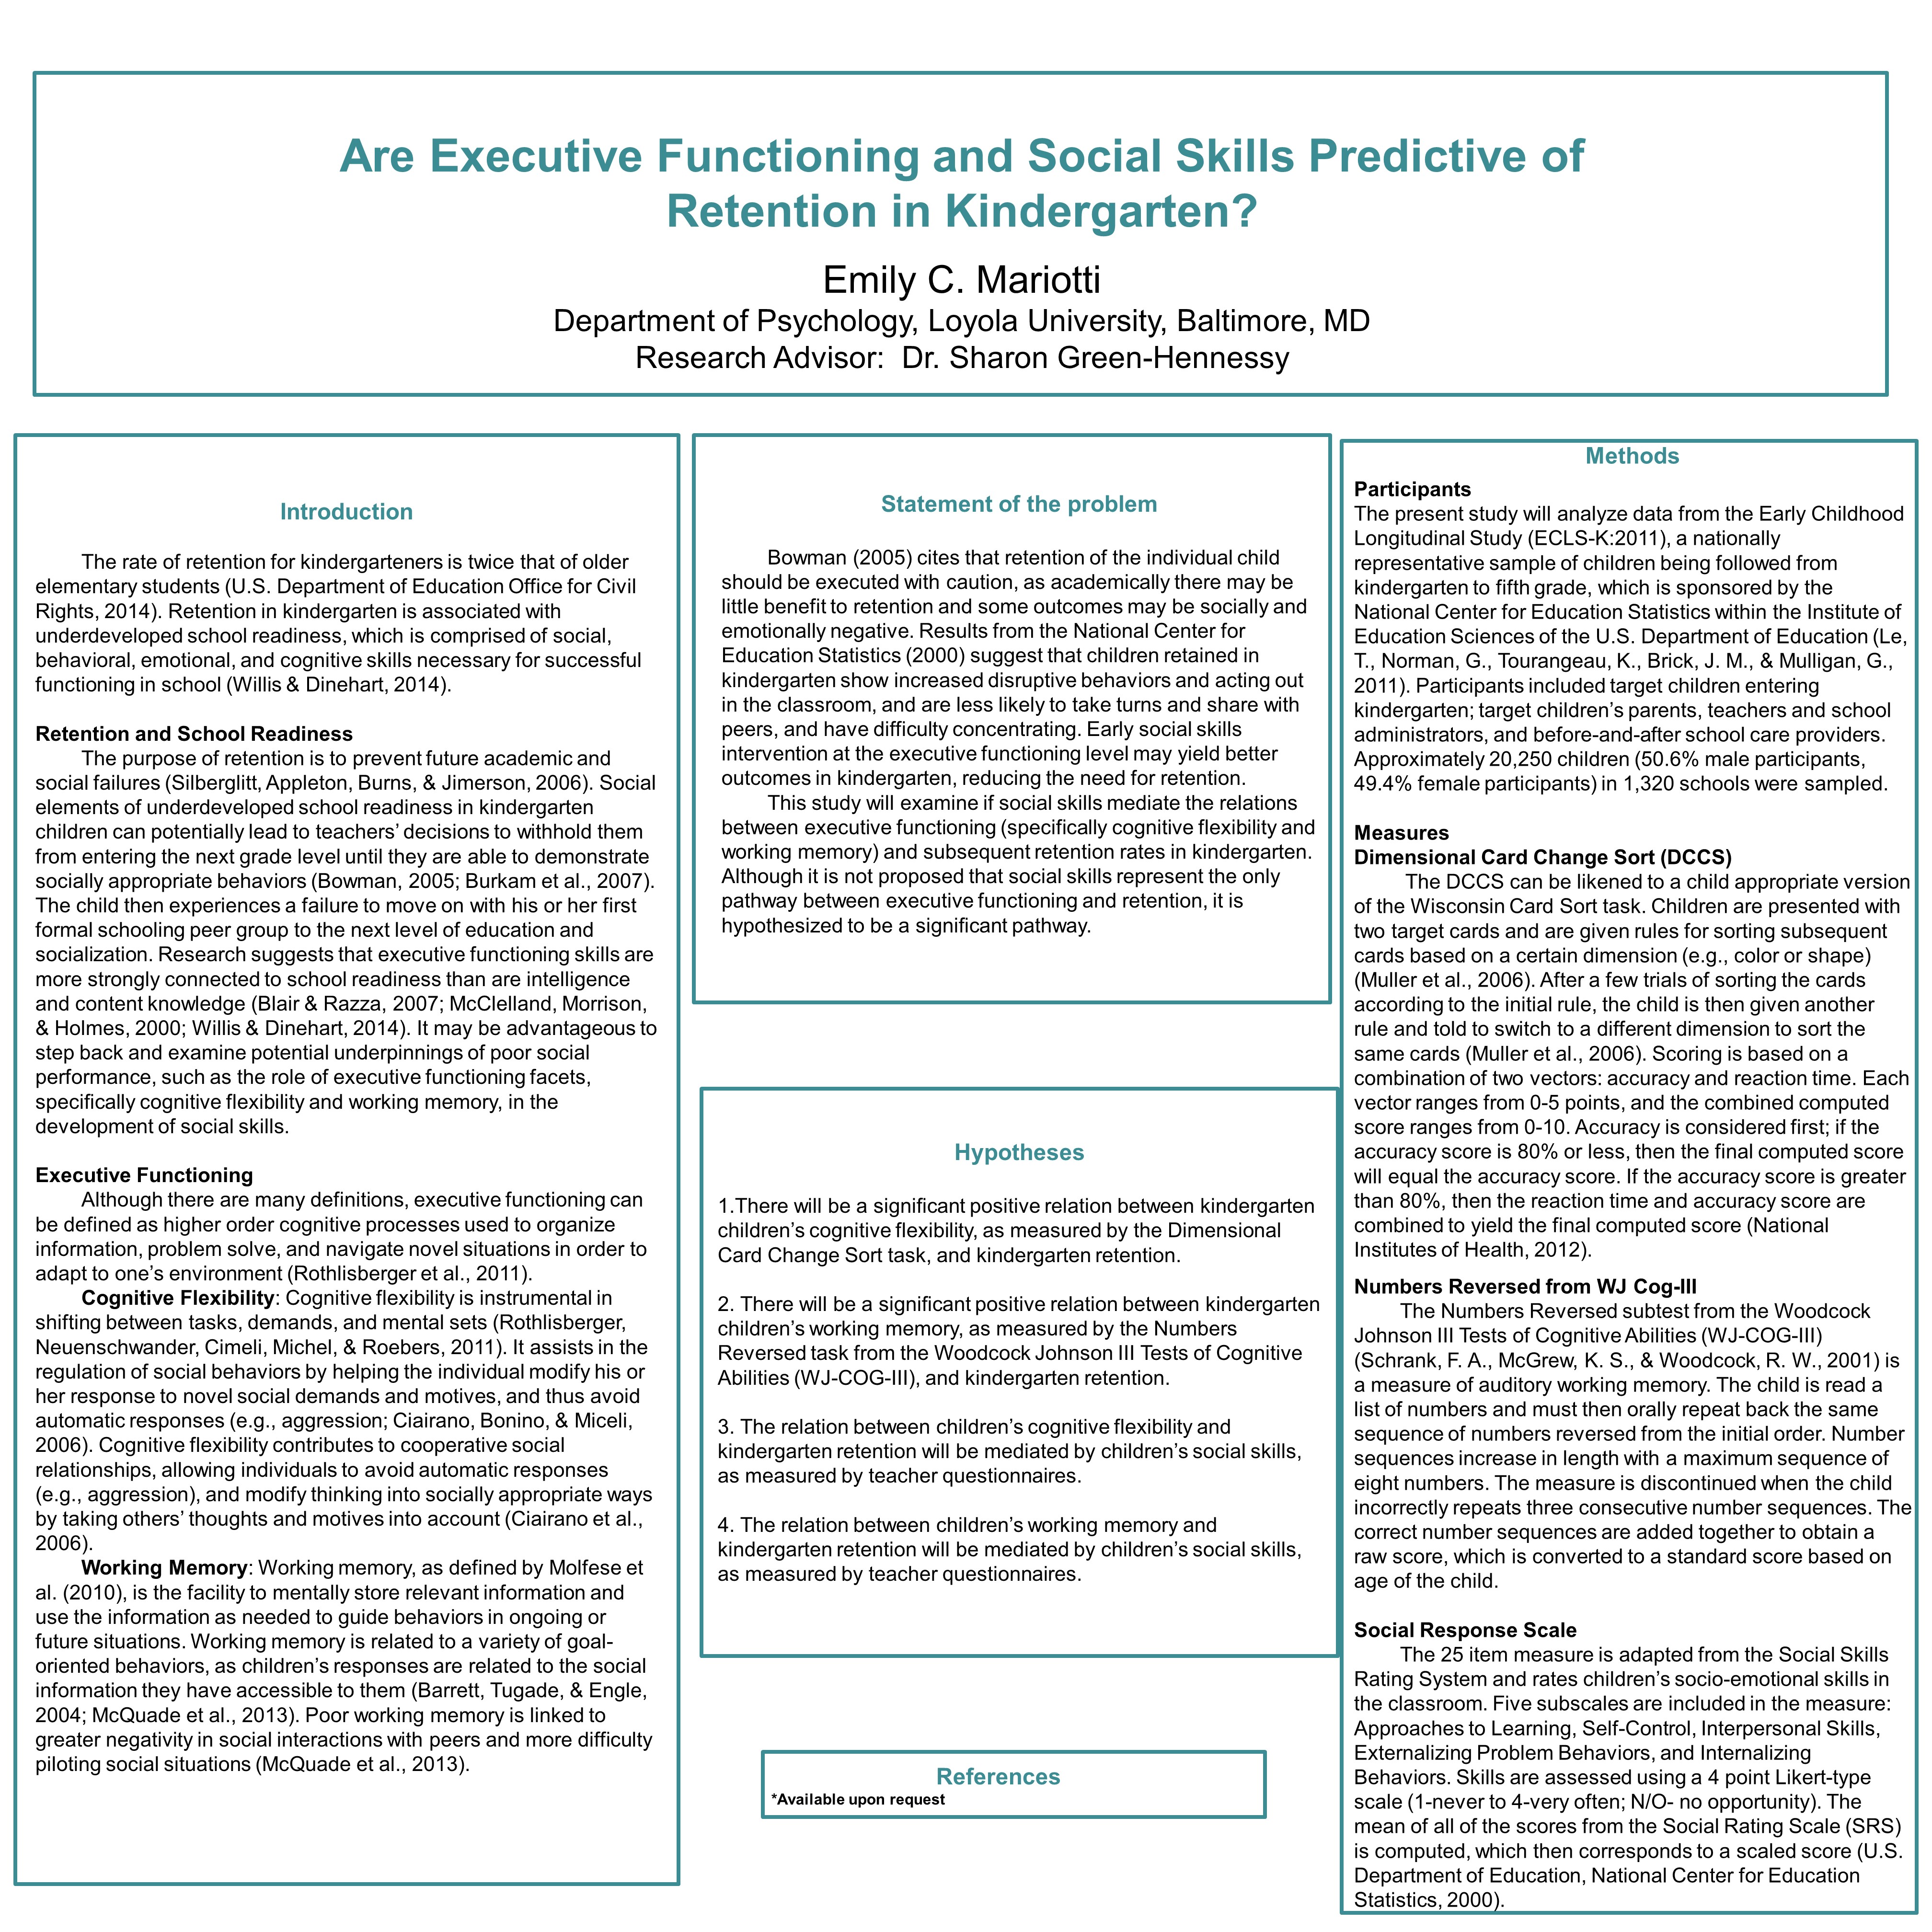 poster image: Are Executive Functioning and Social Skills Predictive of Retention in Kindergarten?